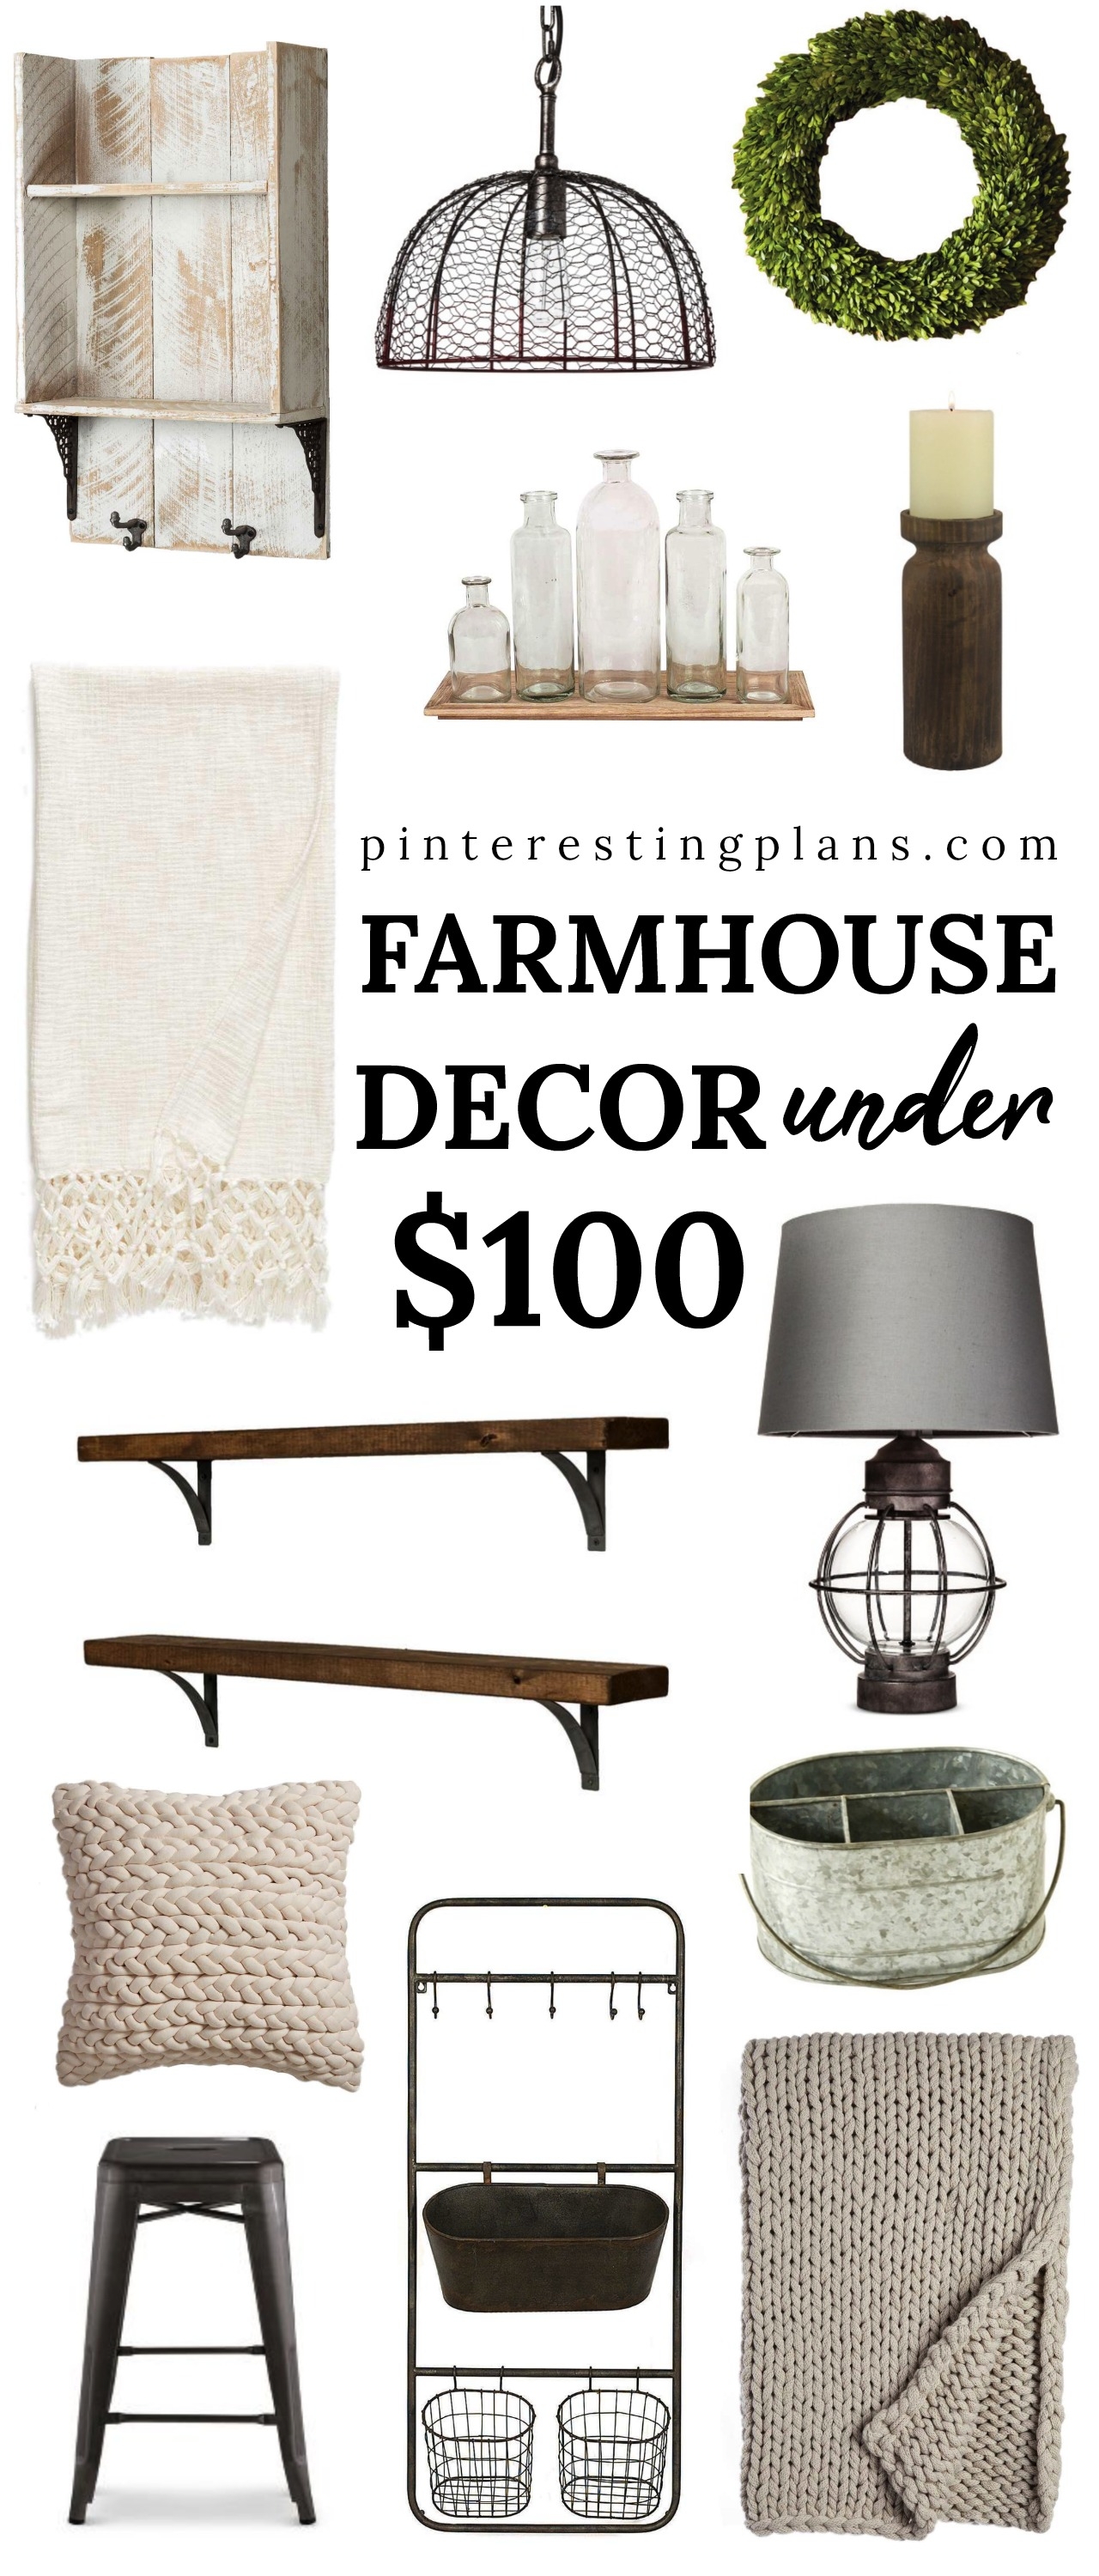 The Best Farmhouse Chic Home Decor Pieces under $100 | Pinteresting Plans a New England Style Blog